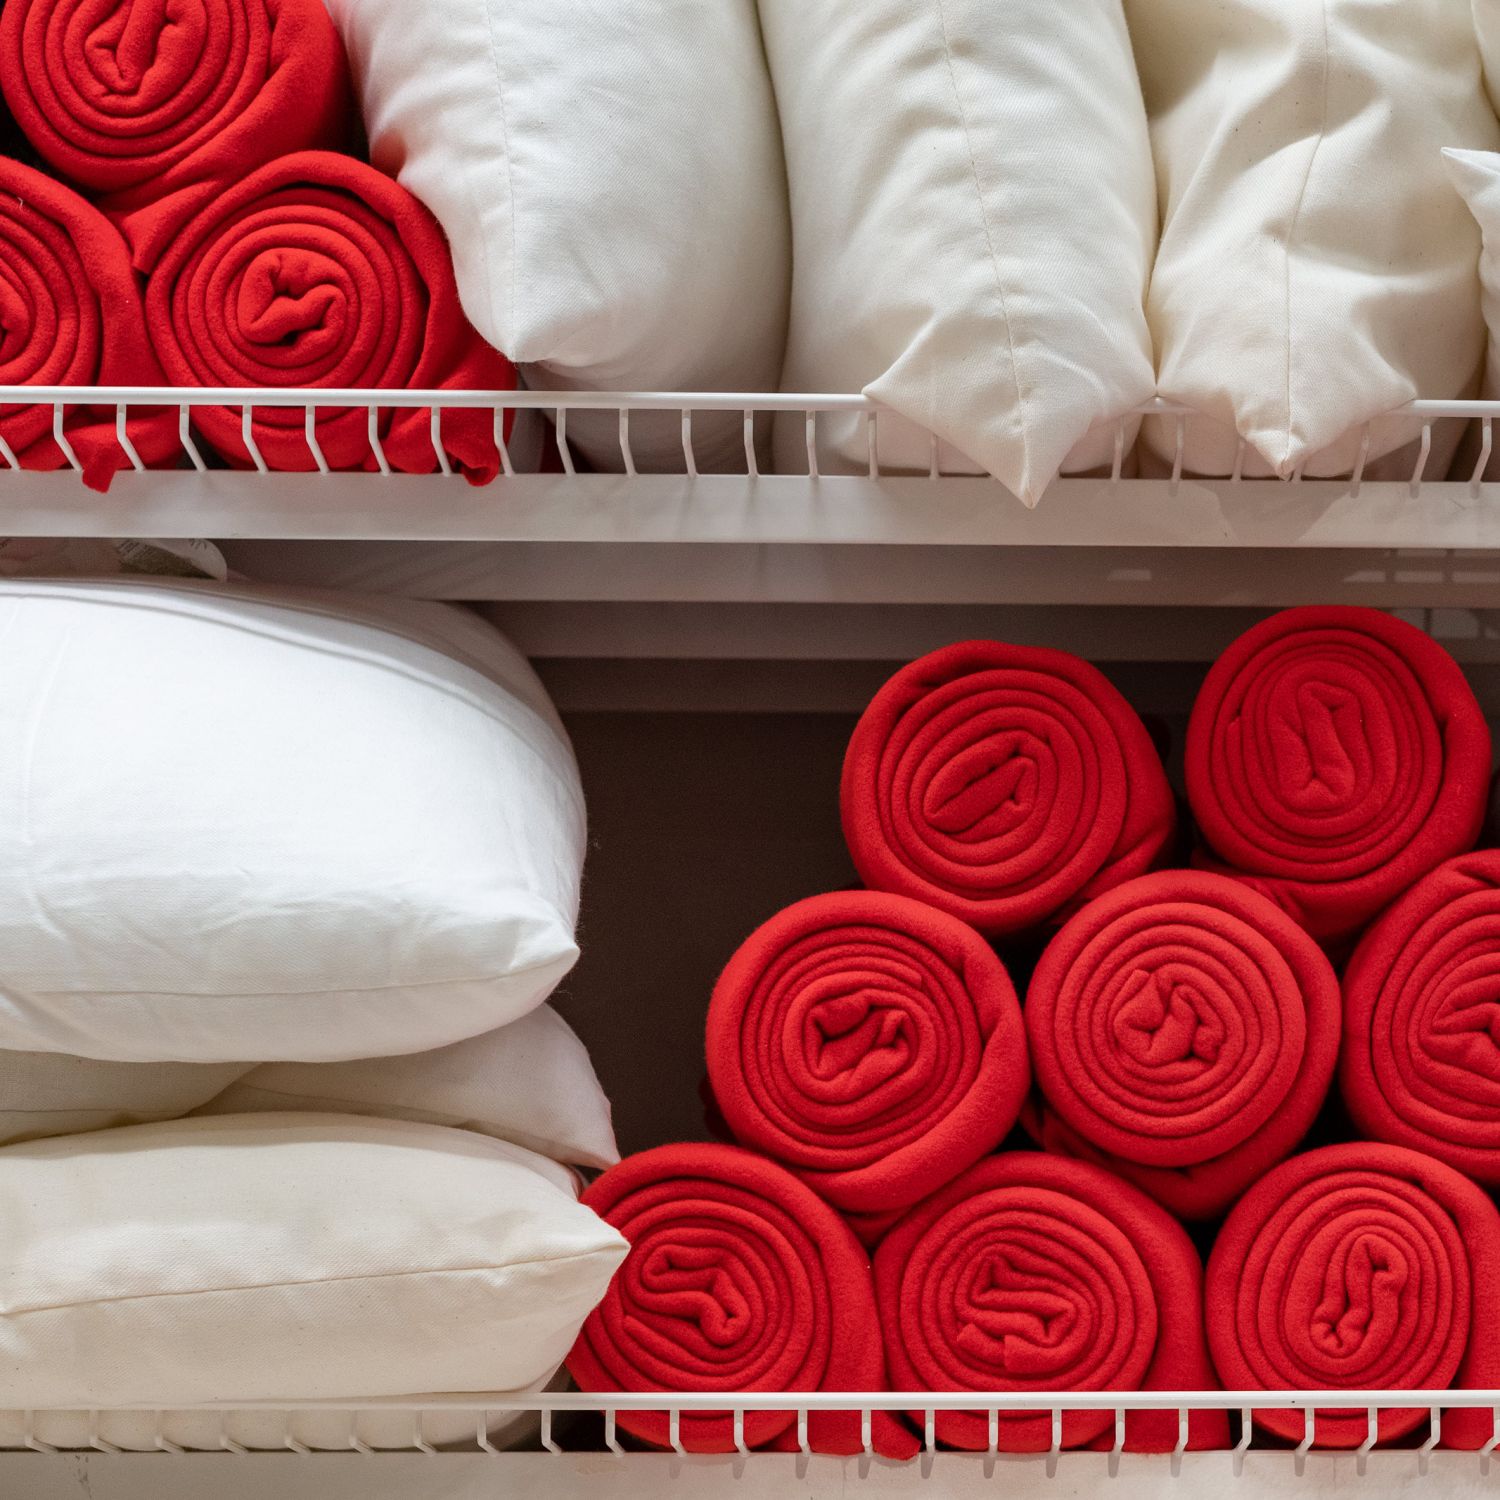 best time to buy things for your home like linens in image of comforters pillows and red blankets